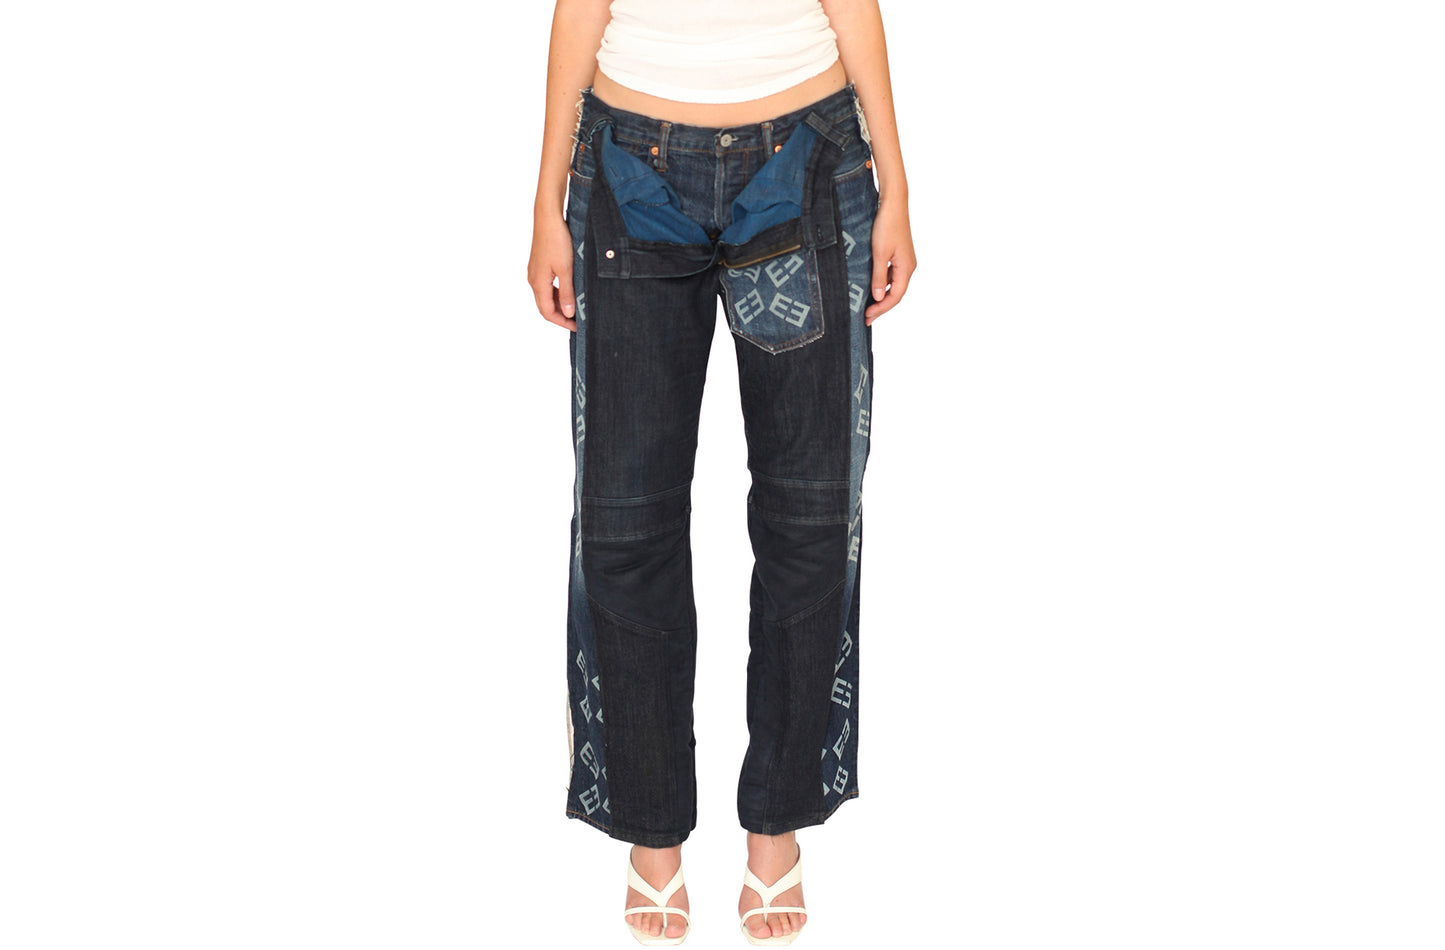 EE Layered Jeans